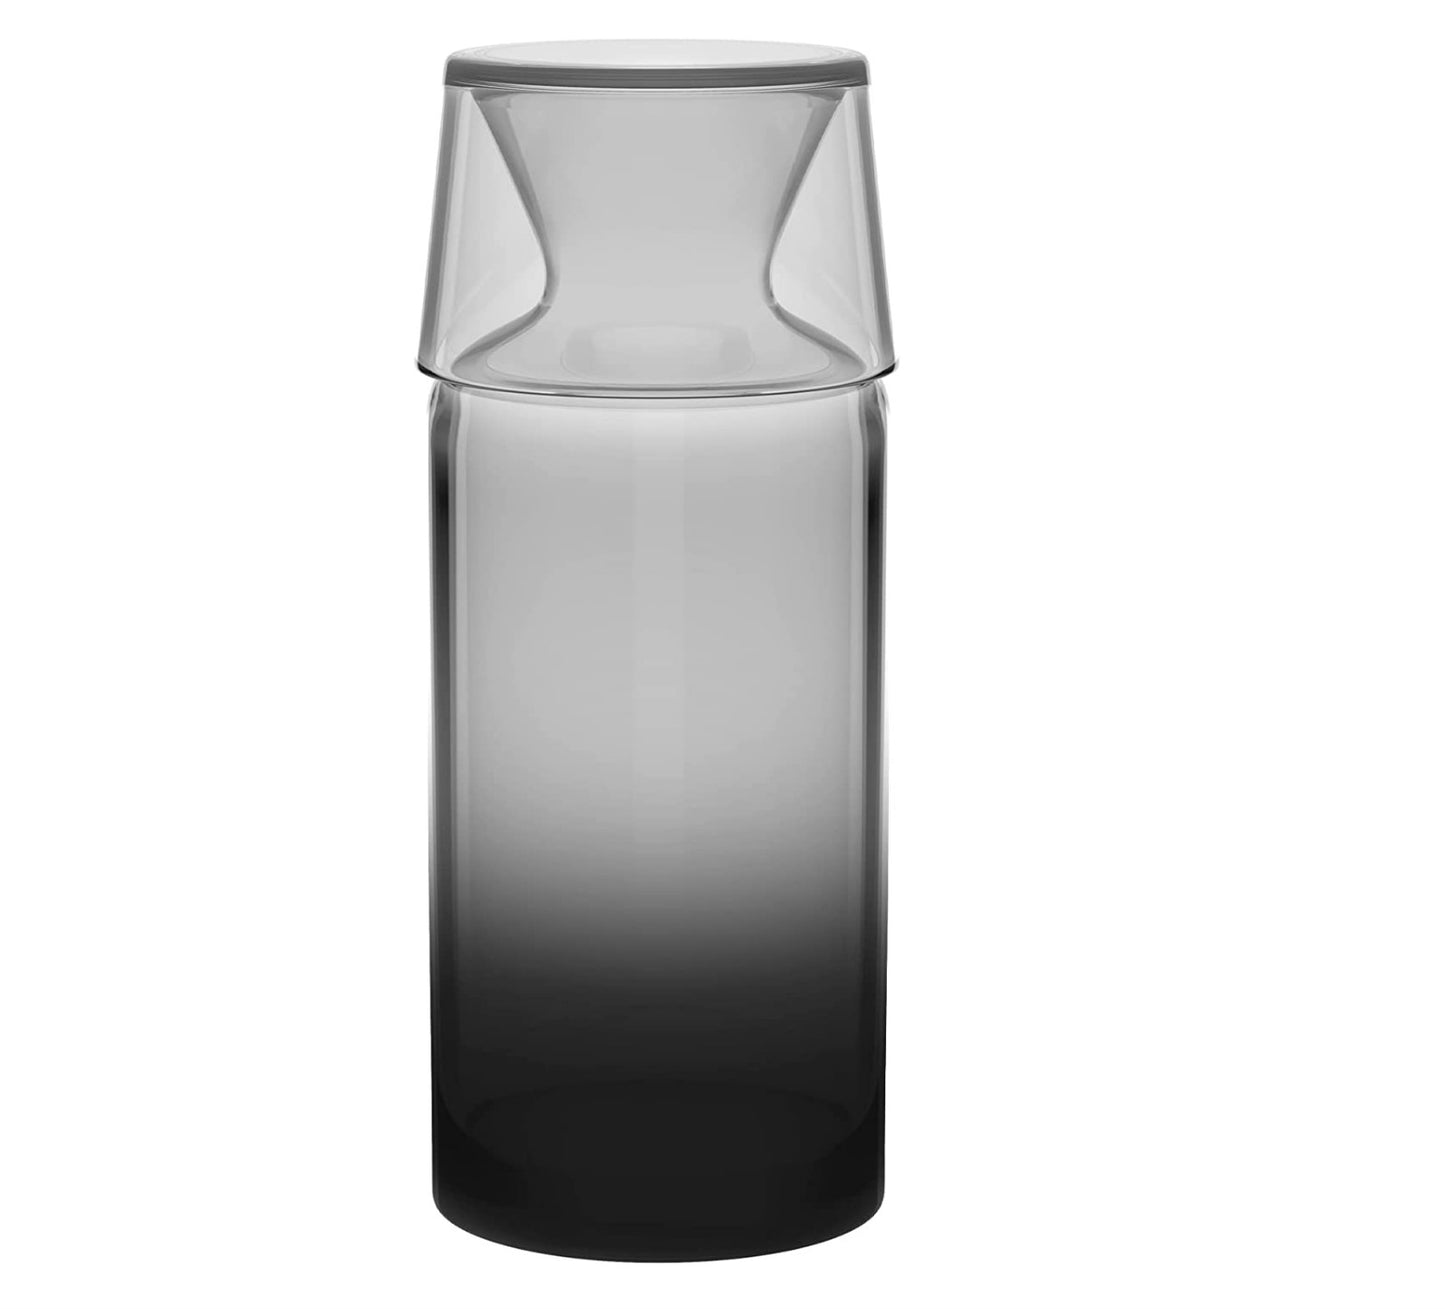 Smoked Ombre Water Carafe - $95.00